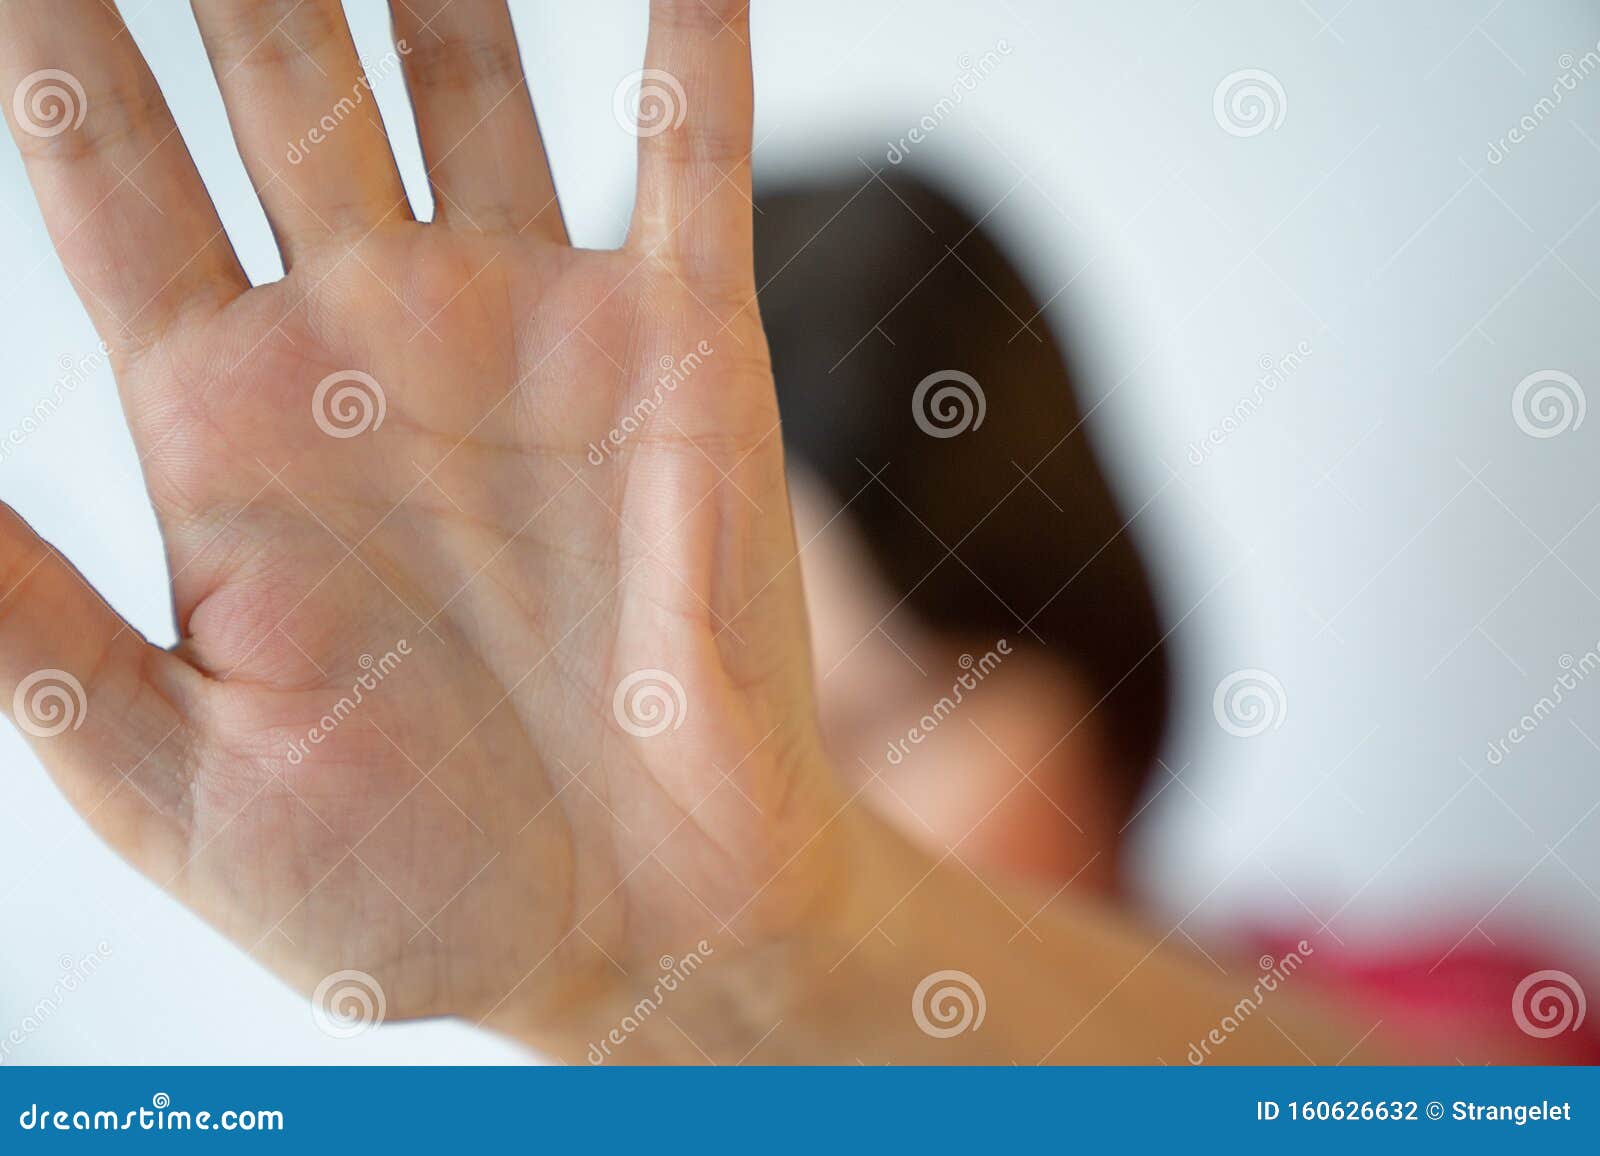 young woman is hiding face with hand, restriction gesture, privacy, anonymity concept